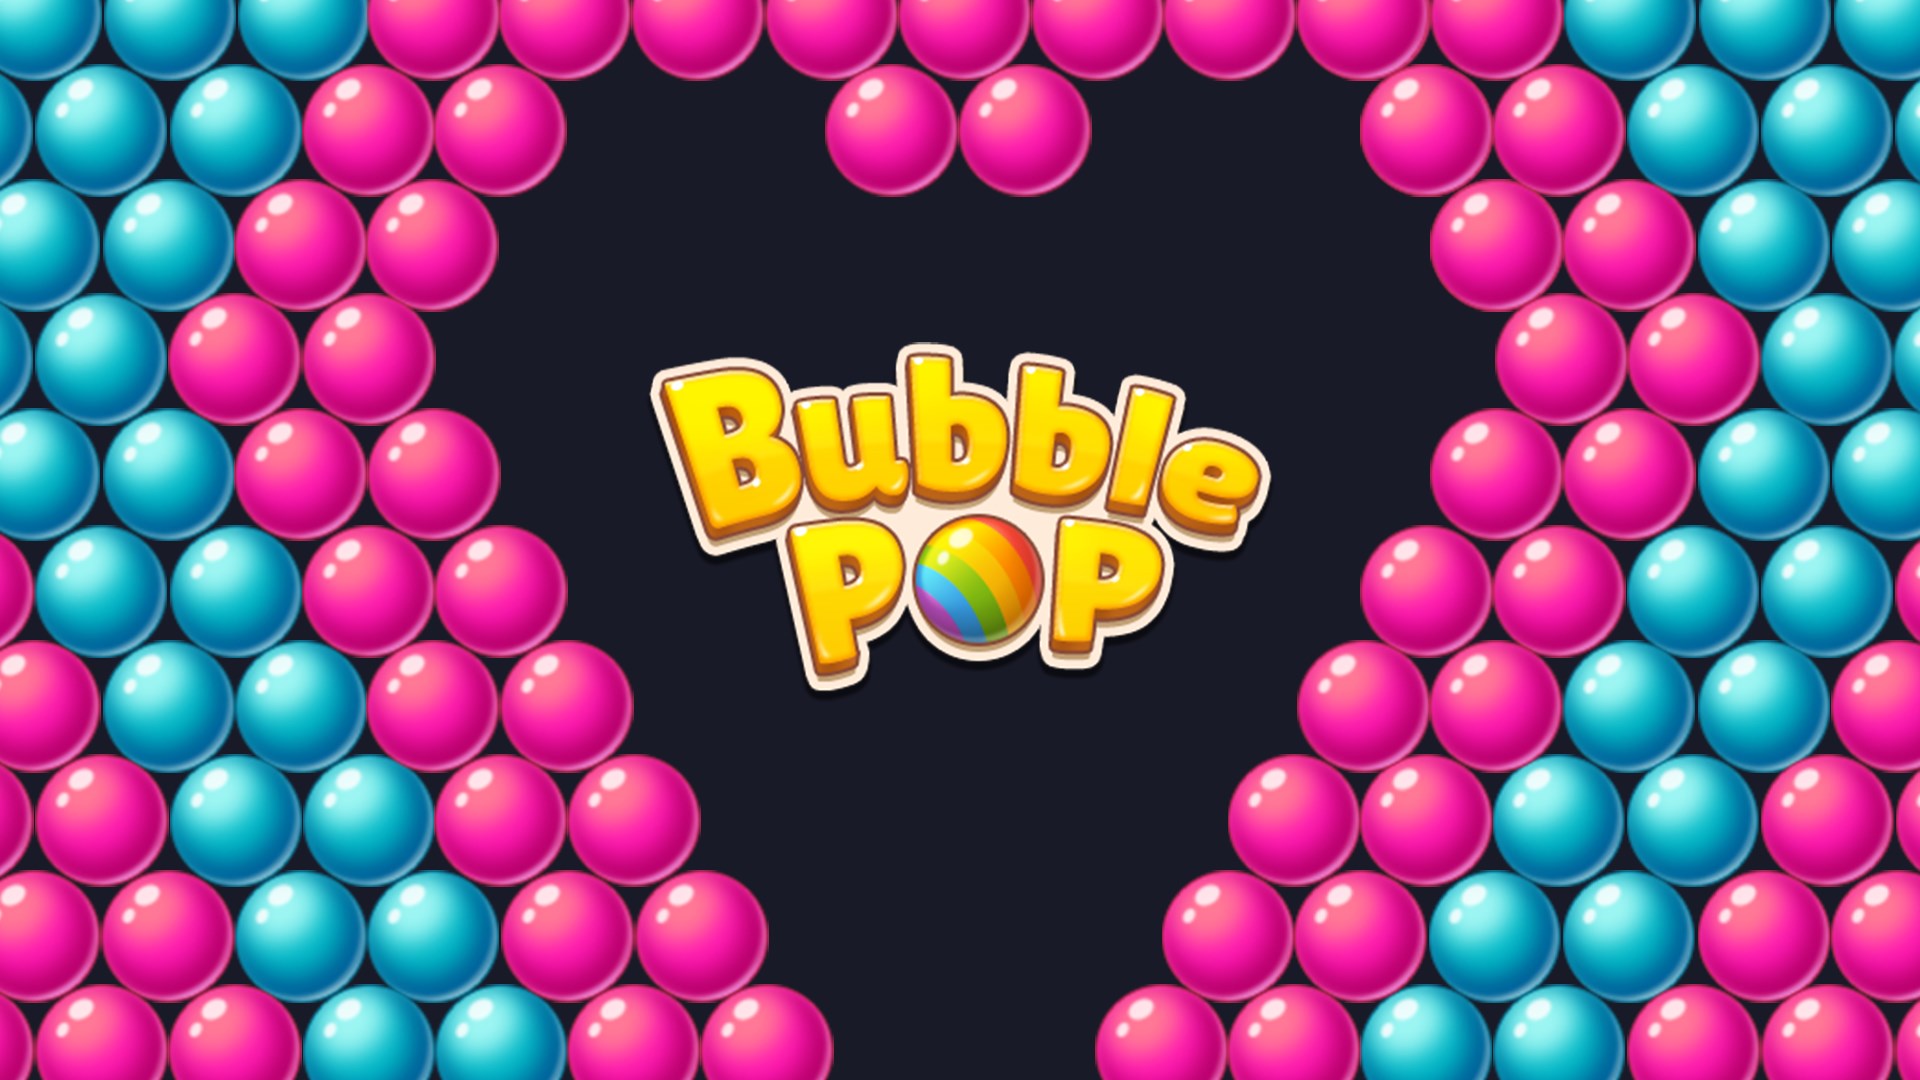 Bubble Shooter 5 - Online Game - Play for Free